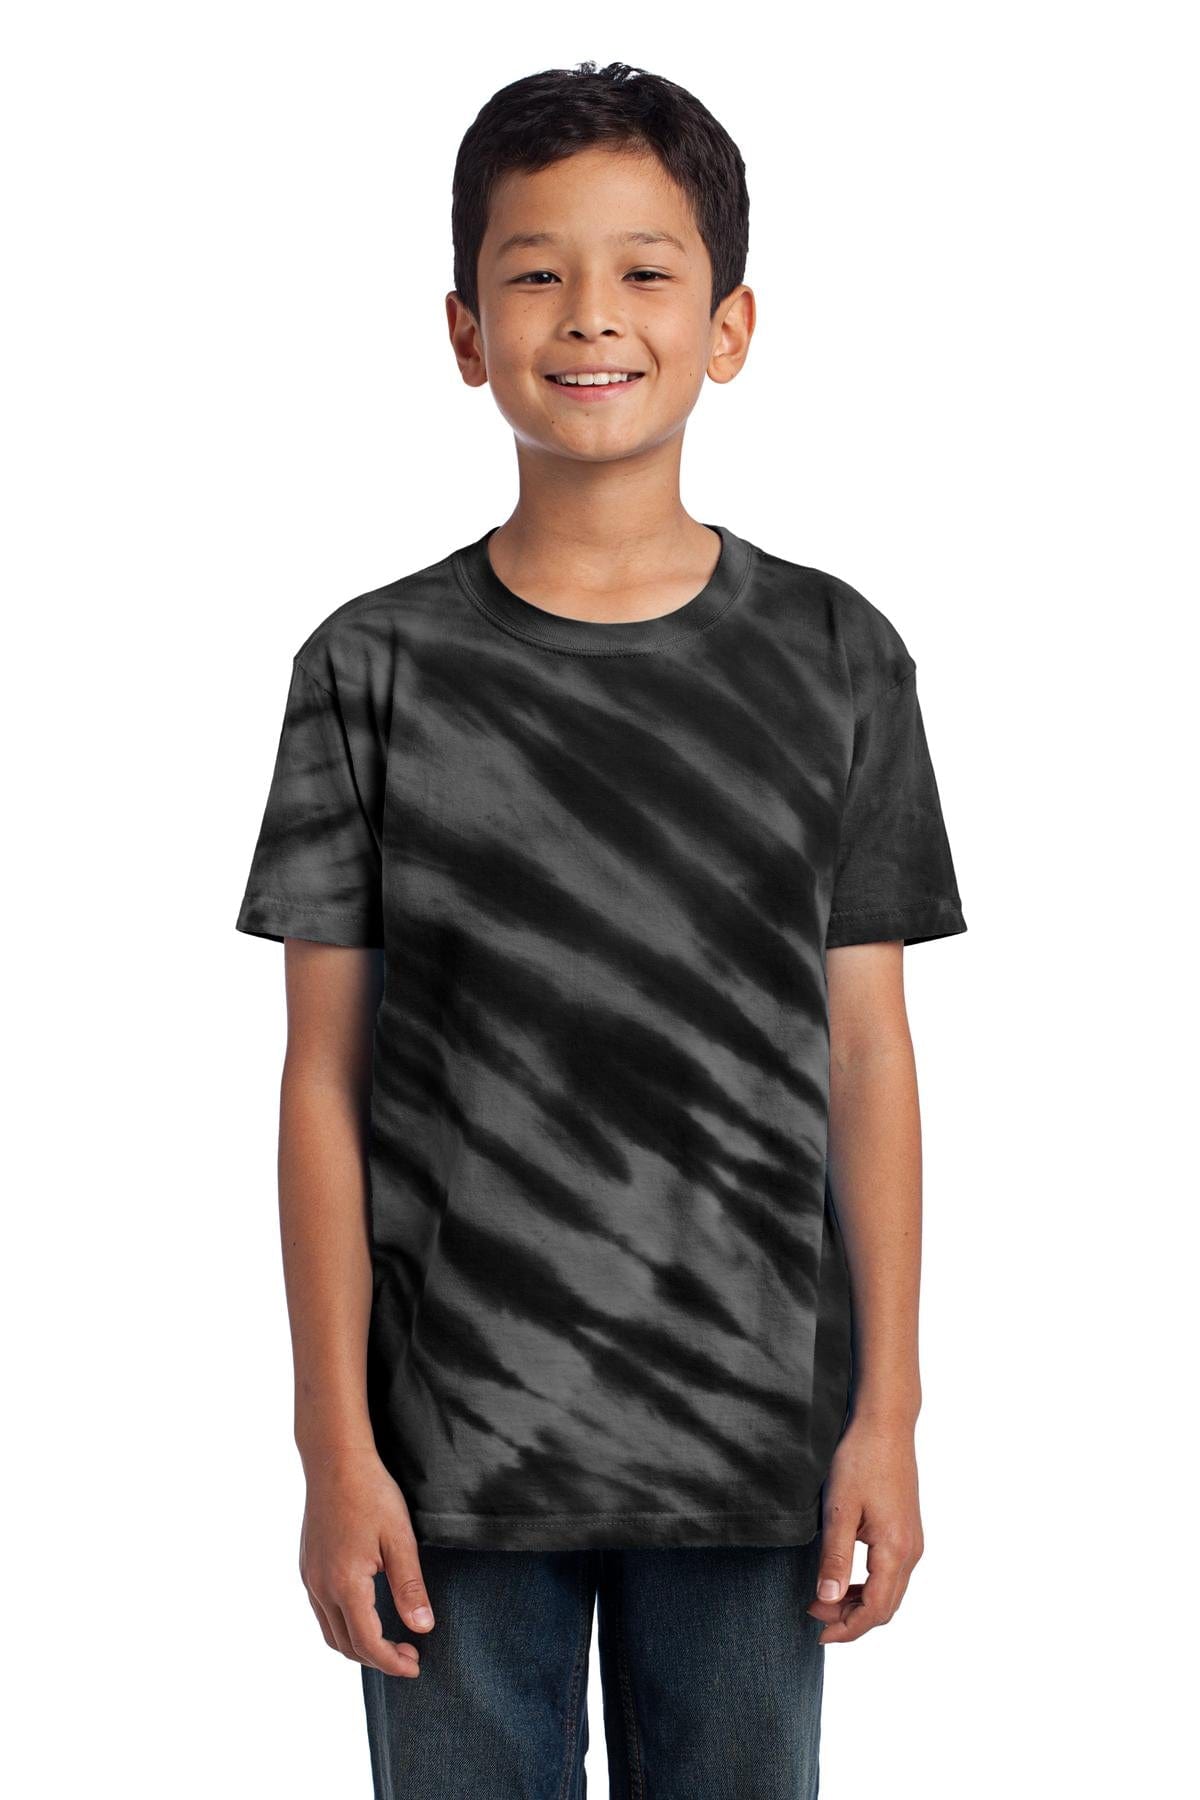 DISCONTINUED Port & Company ® - Youth Tiger Stripe Tie-Dye Tee. PC148Y